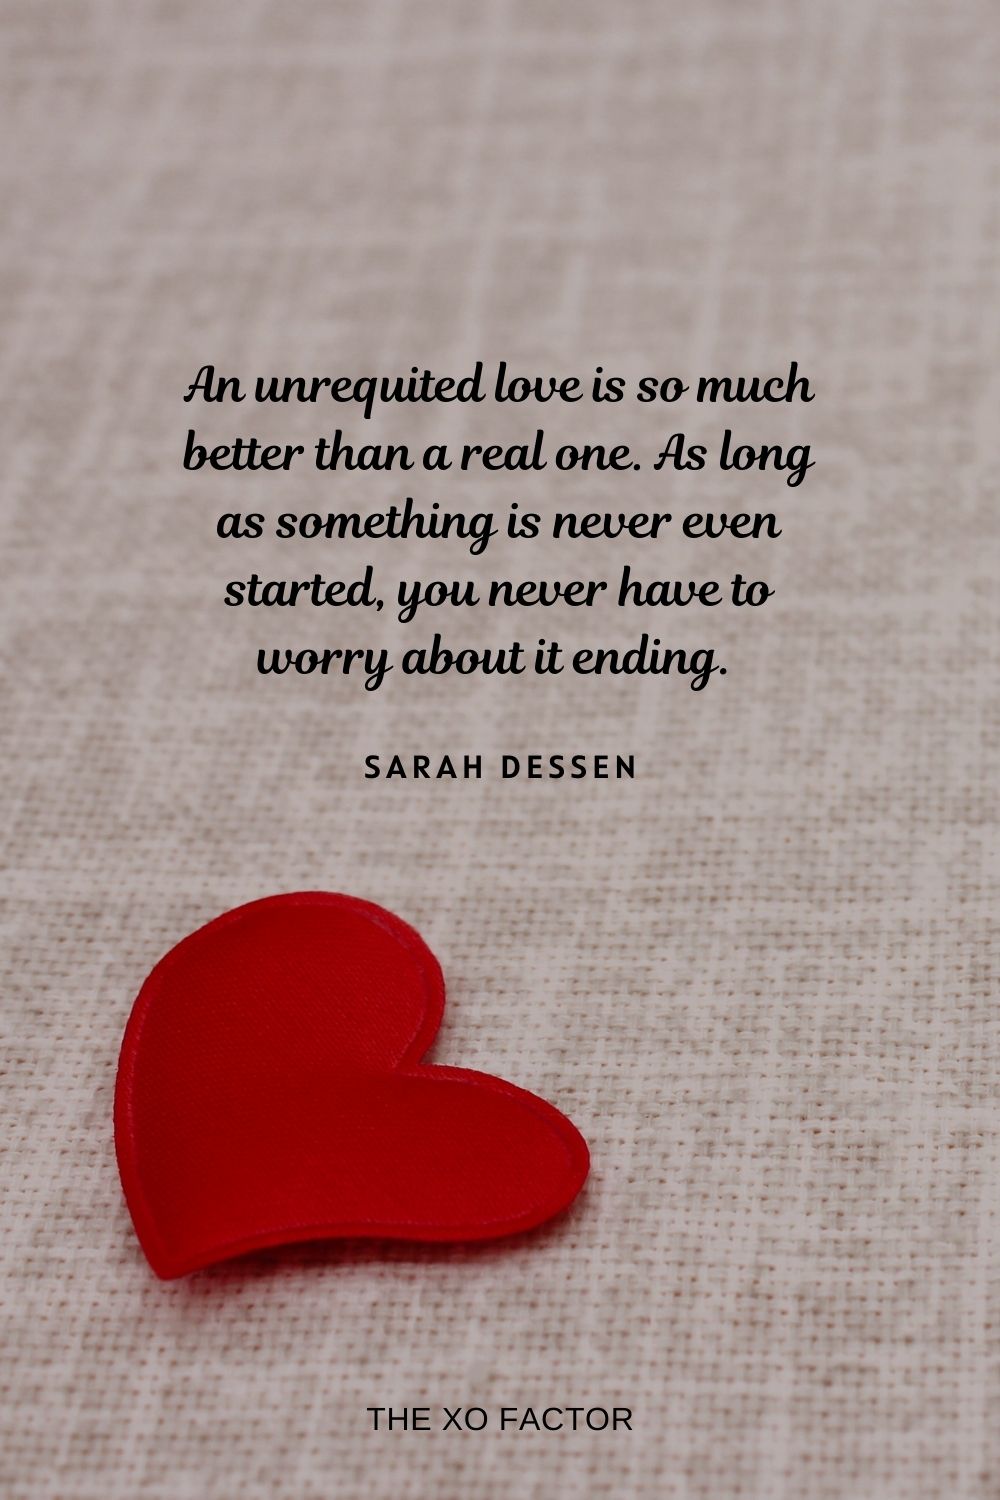 An unrequited love is so much better than a real one. As long as something is never even started, you never have to worry about it ending.  Sarah Dessen